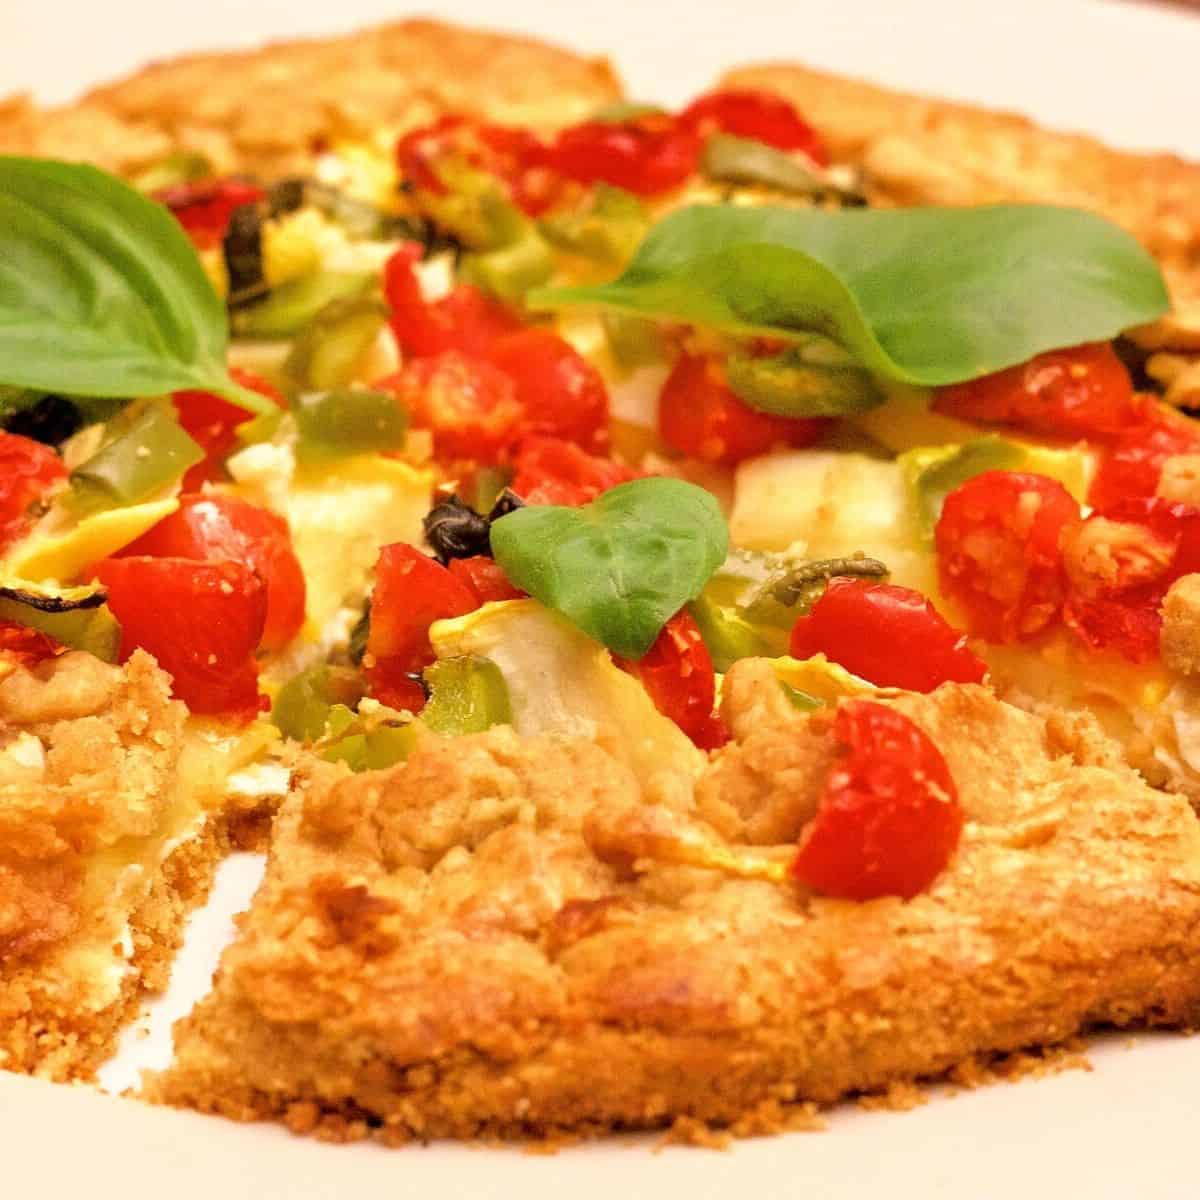 Whole wheat herbed patty pan squash tomato tart, sliced into wedged, with bright red cherry tomatoes and green basil leaves on top